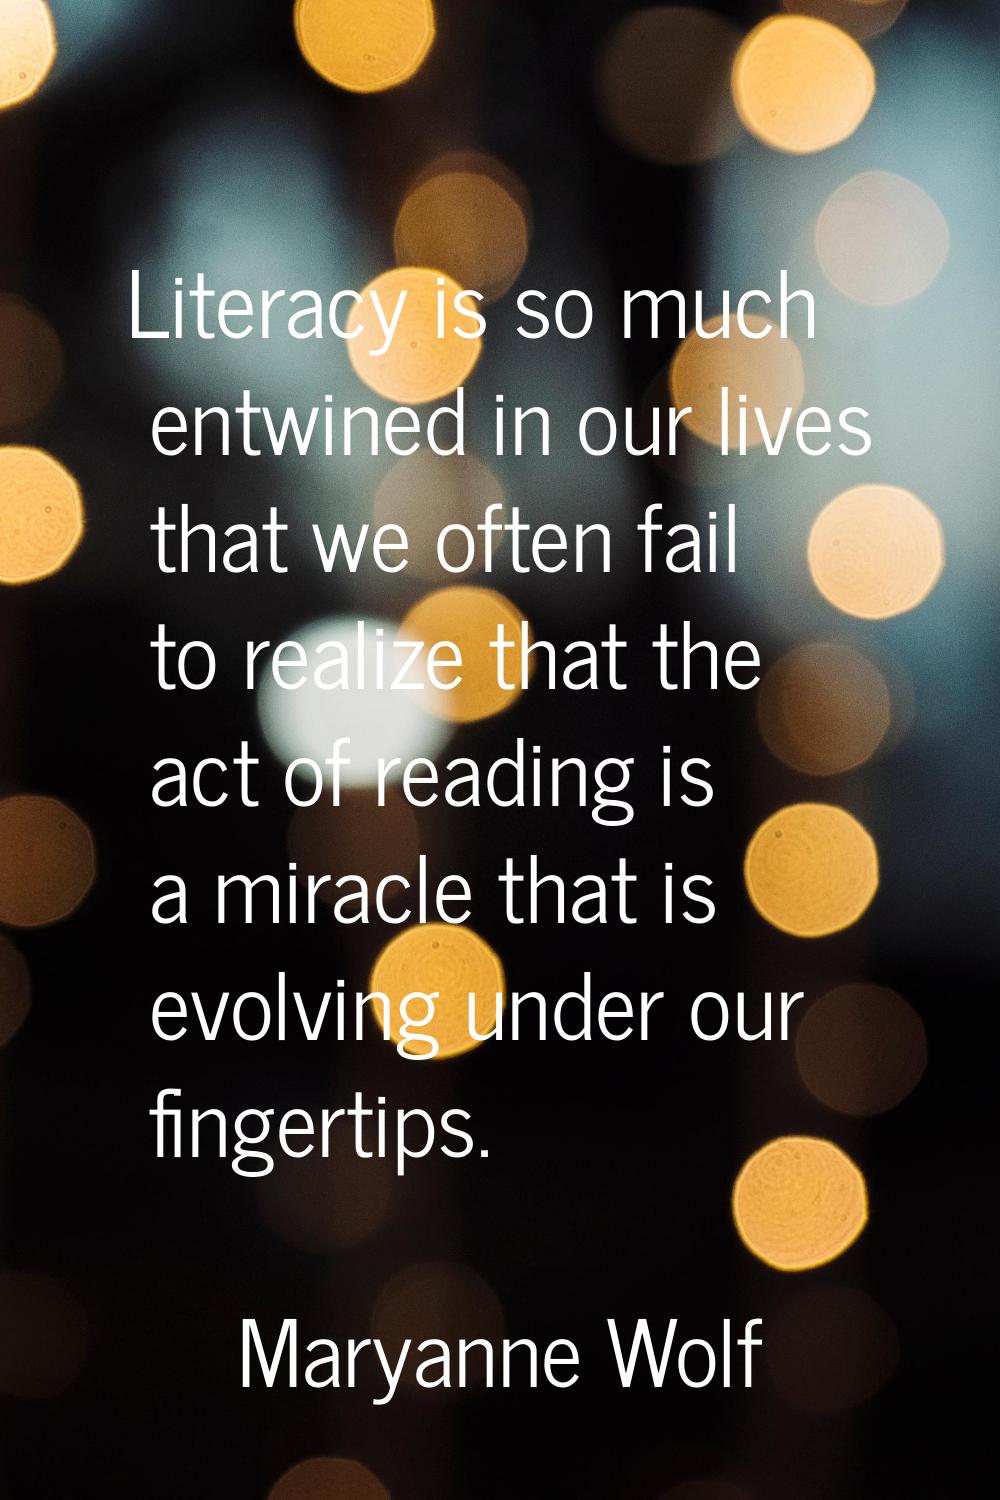 Literacy is so much entwined in our lives that we often fail to realize that the act of reading is 